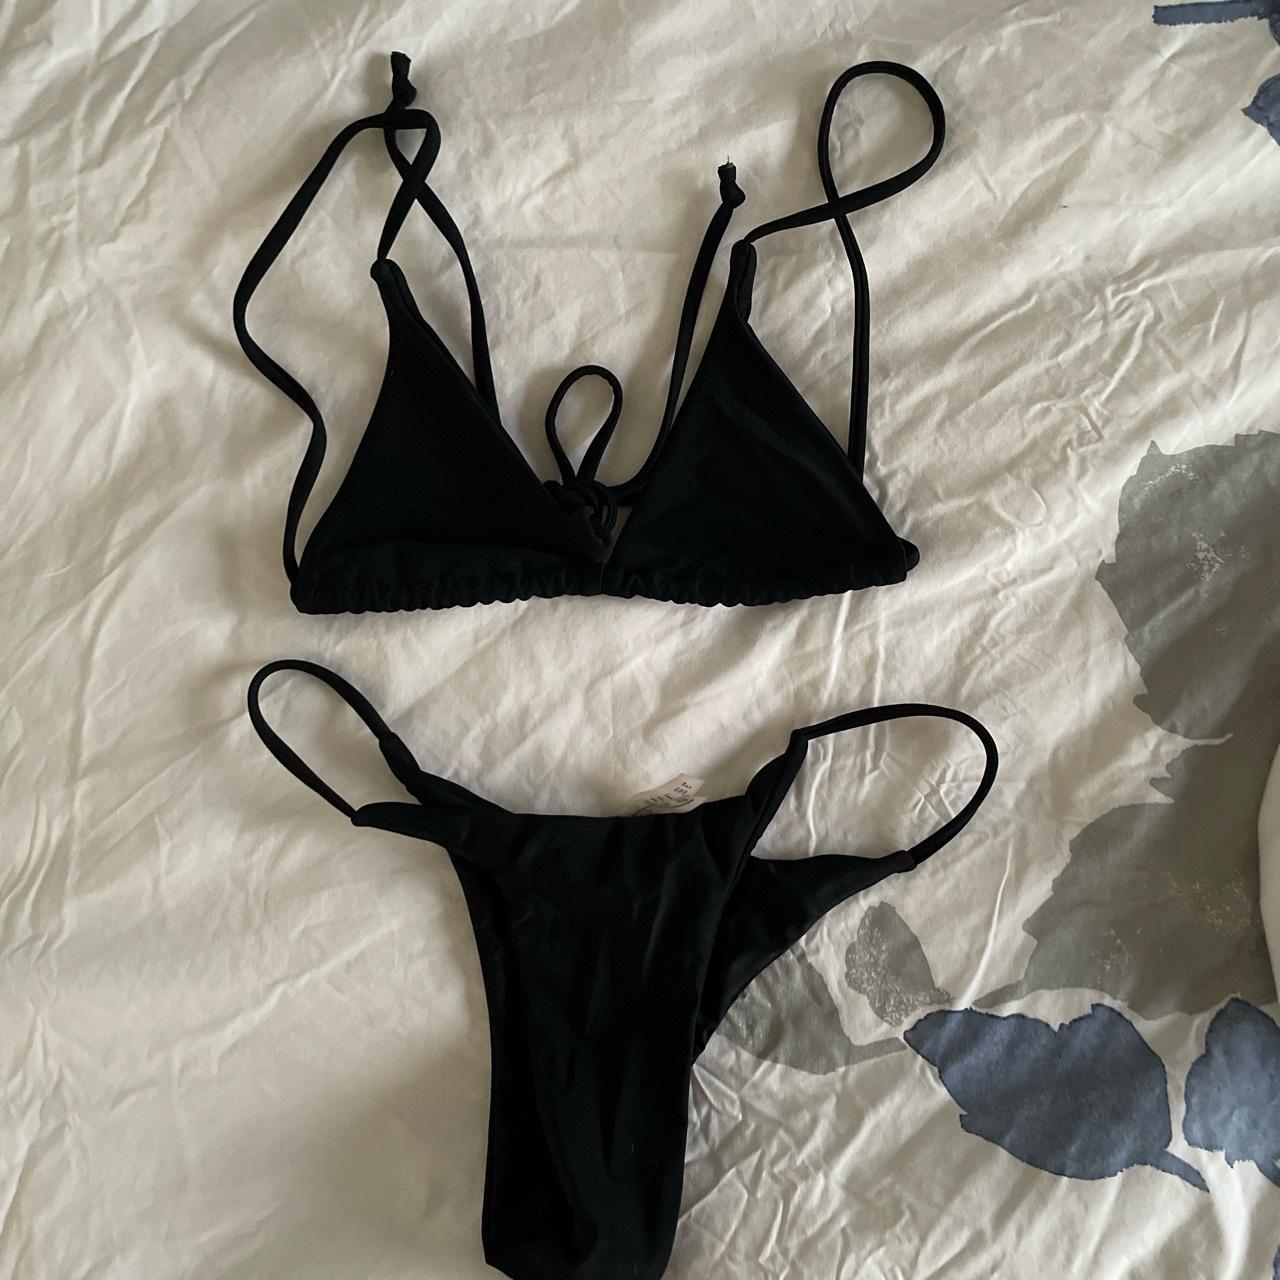 Zaful tie bikini set For the top, the string ties at... - Depop